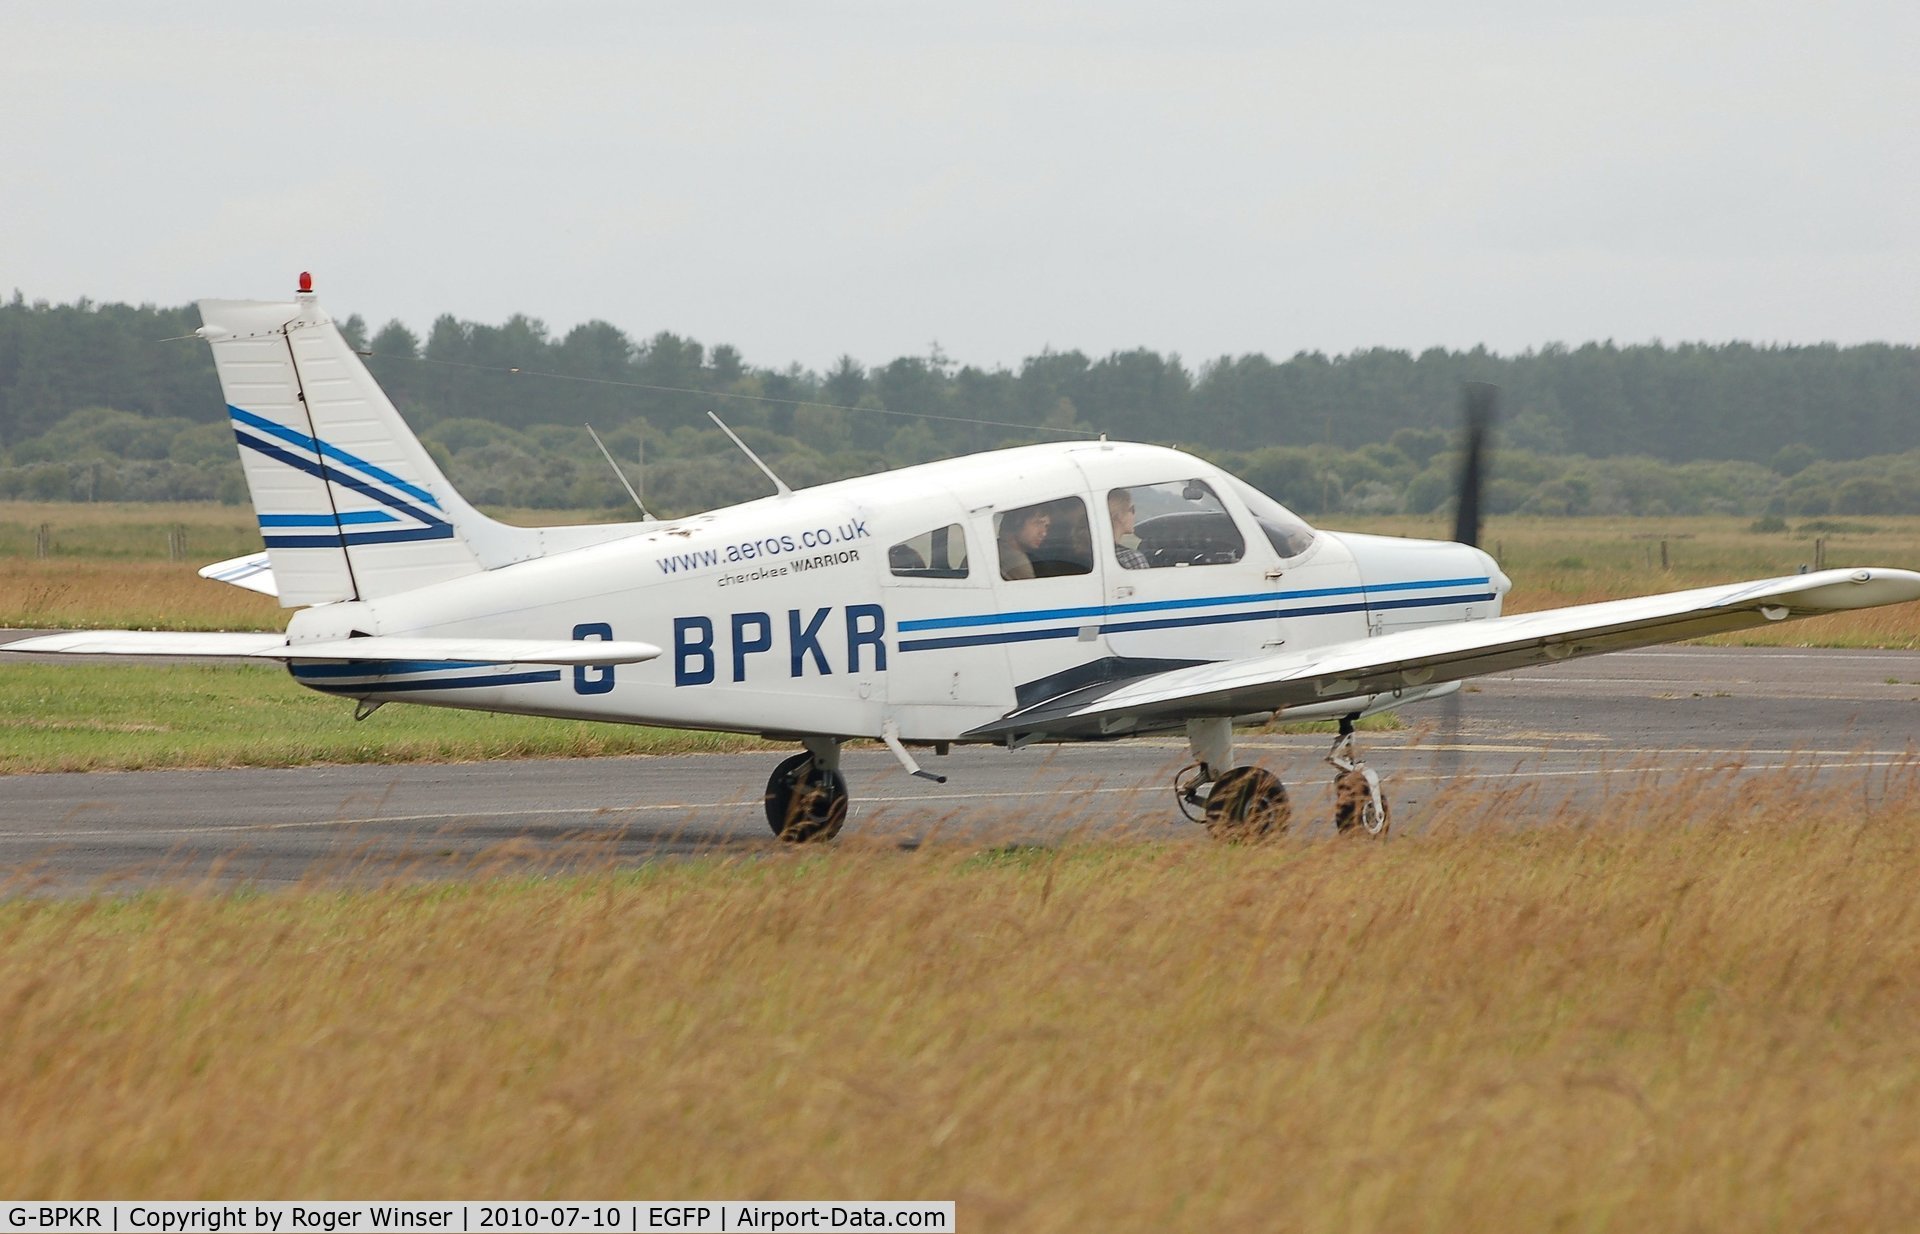 G-BPKR, 1975 Piper PA-28-151 Cherokee Warrior C/N 28-7515446, Piper Cherokee Warrior taxying for departure